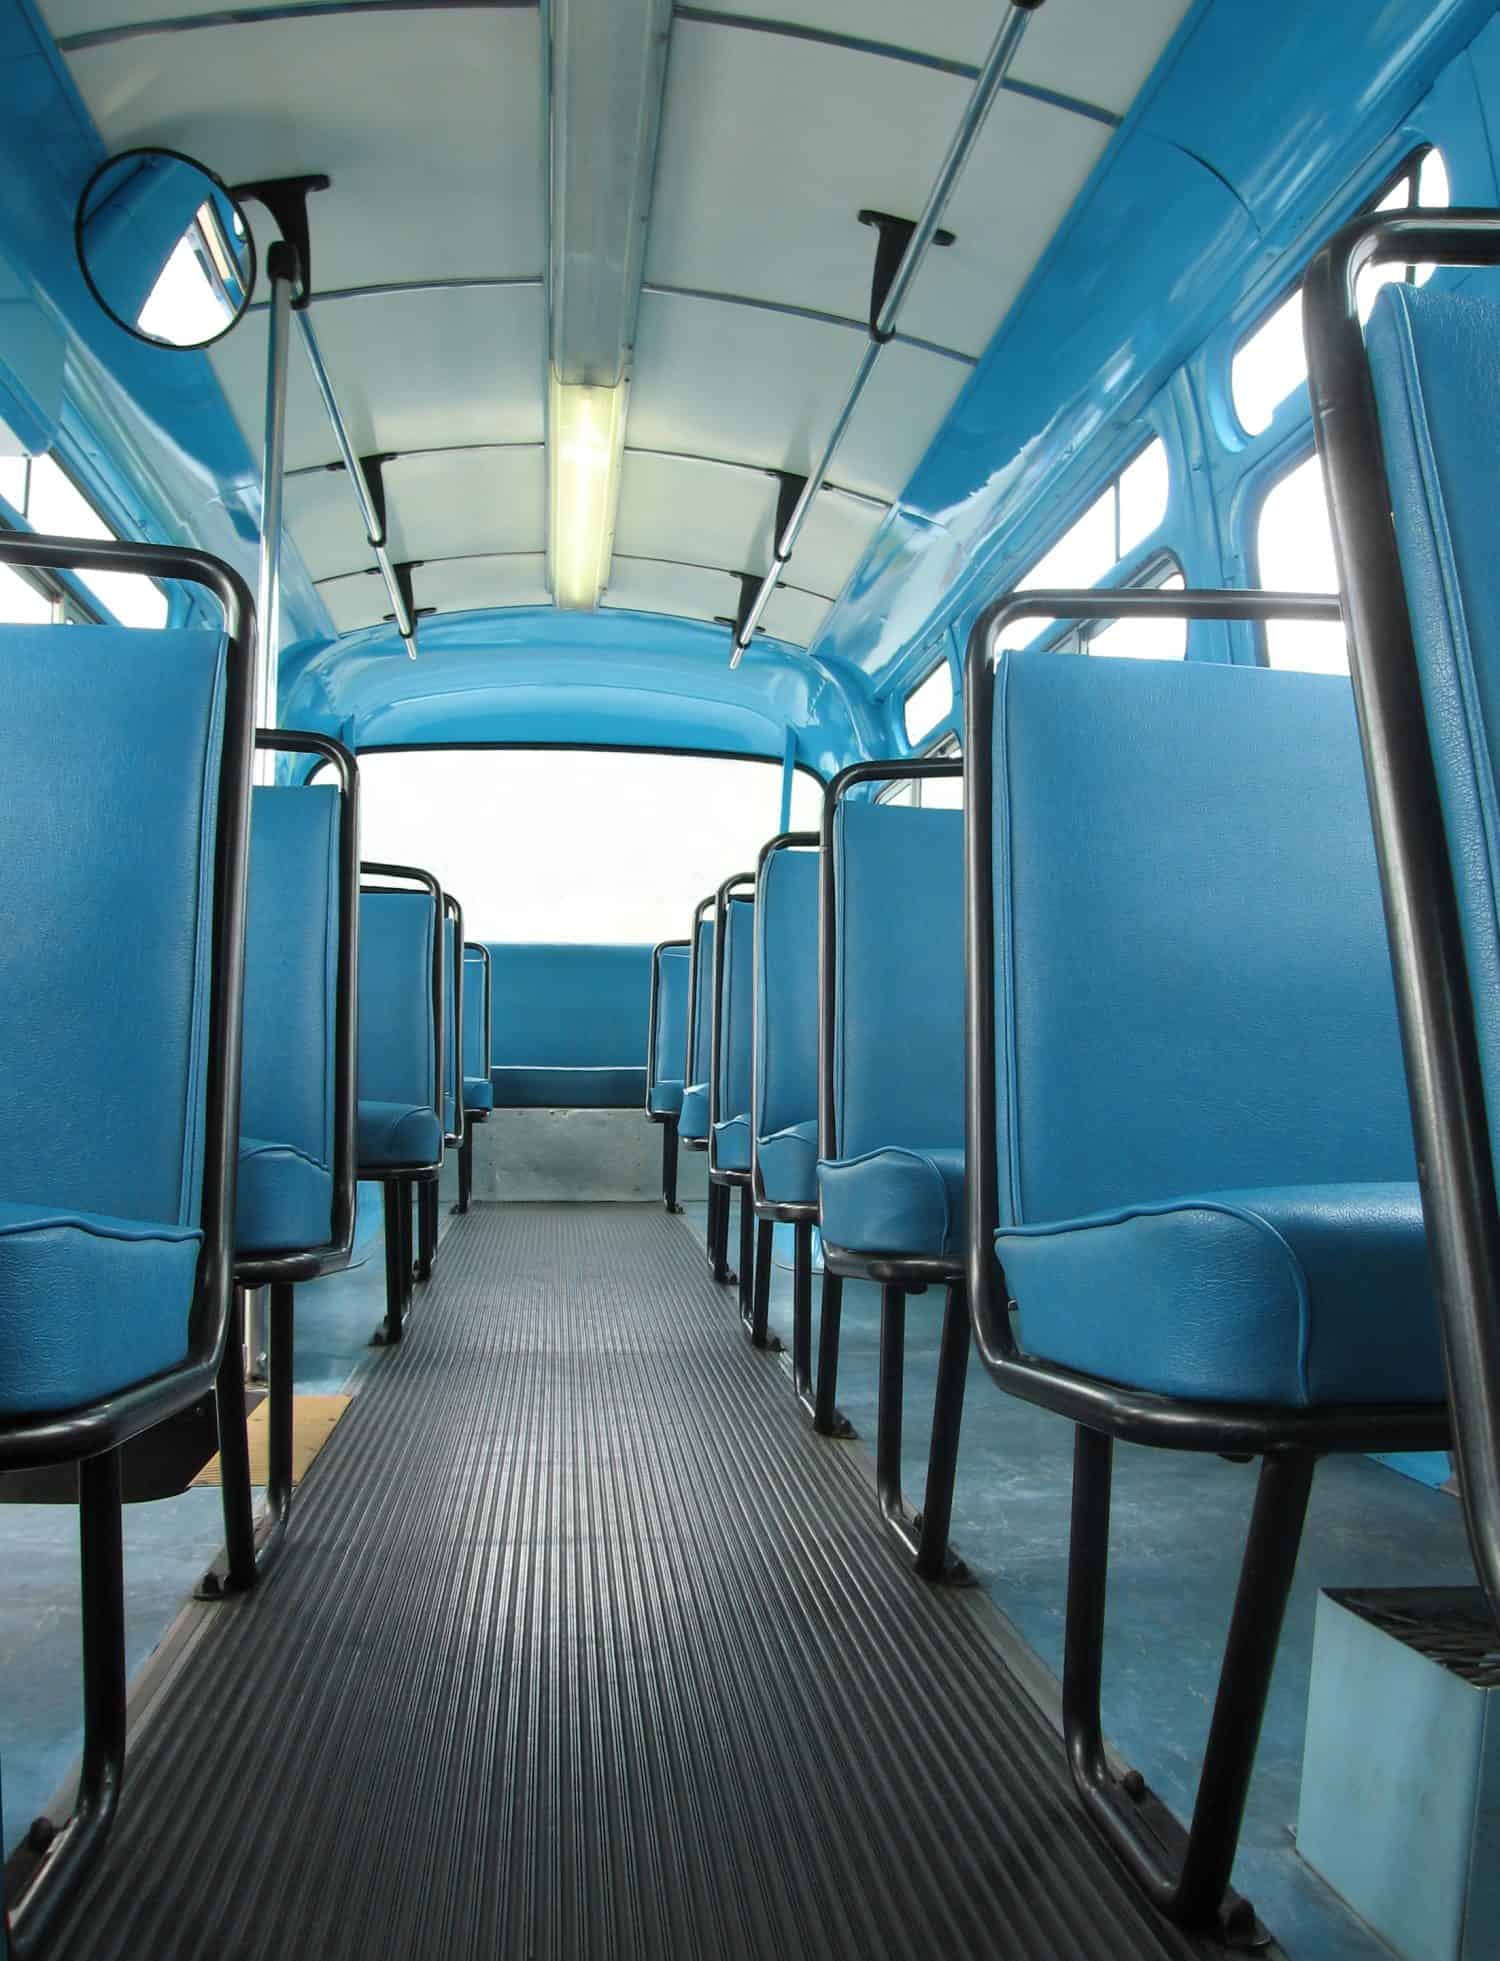 A view down the aisle of a restored 1959 city transit bus. Very much like the bus Rosa Parks made her stand in.